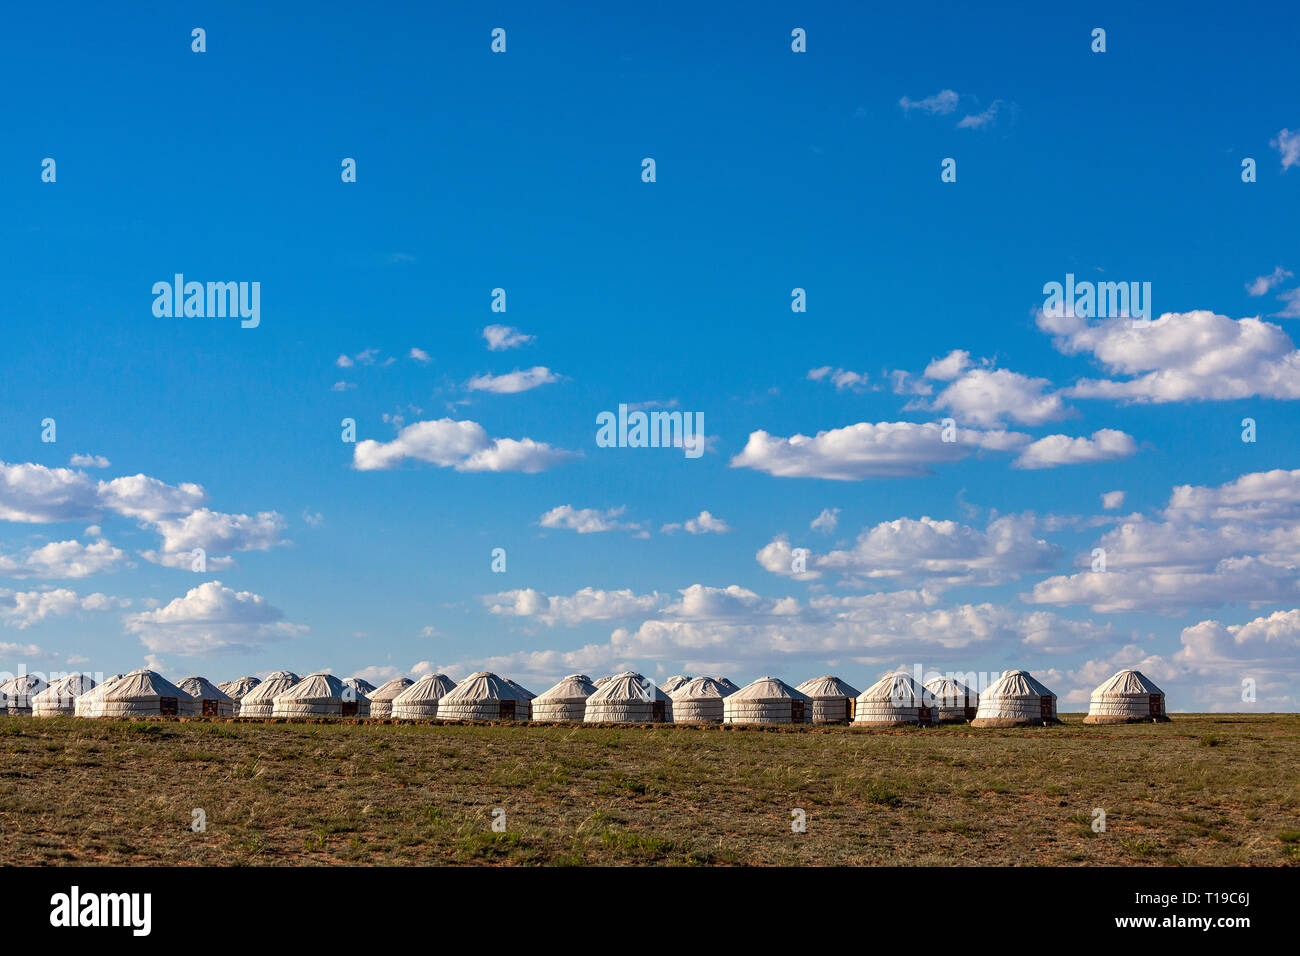 A ger (yurt) camp on the Gegentala grasslands north of Hohhot in Inner Mongolia, China. Stock Photo